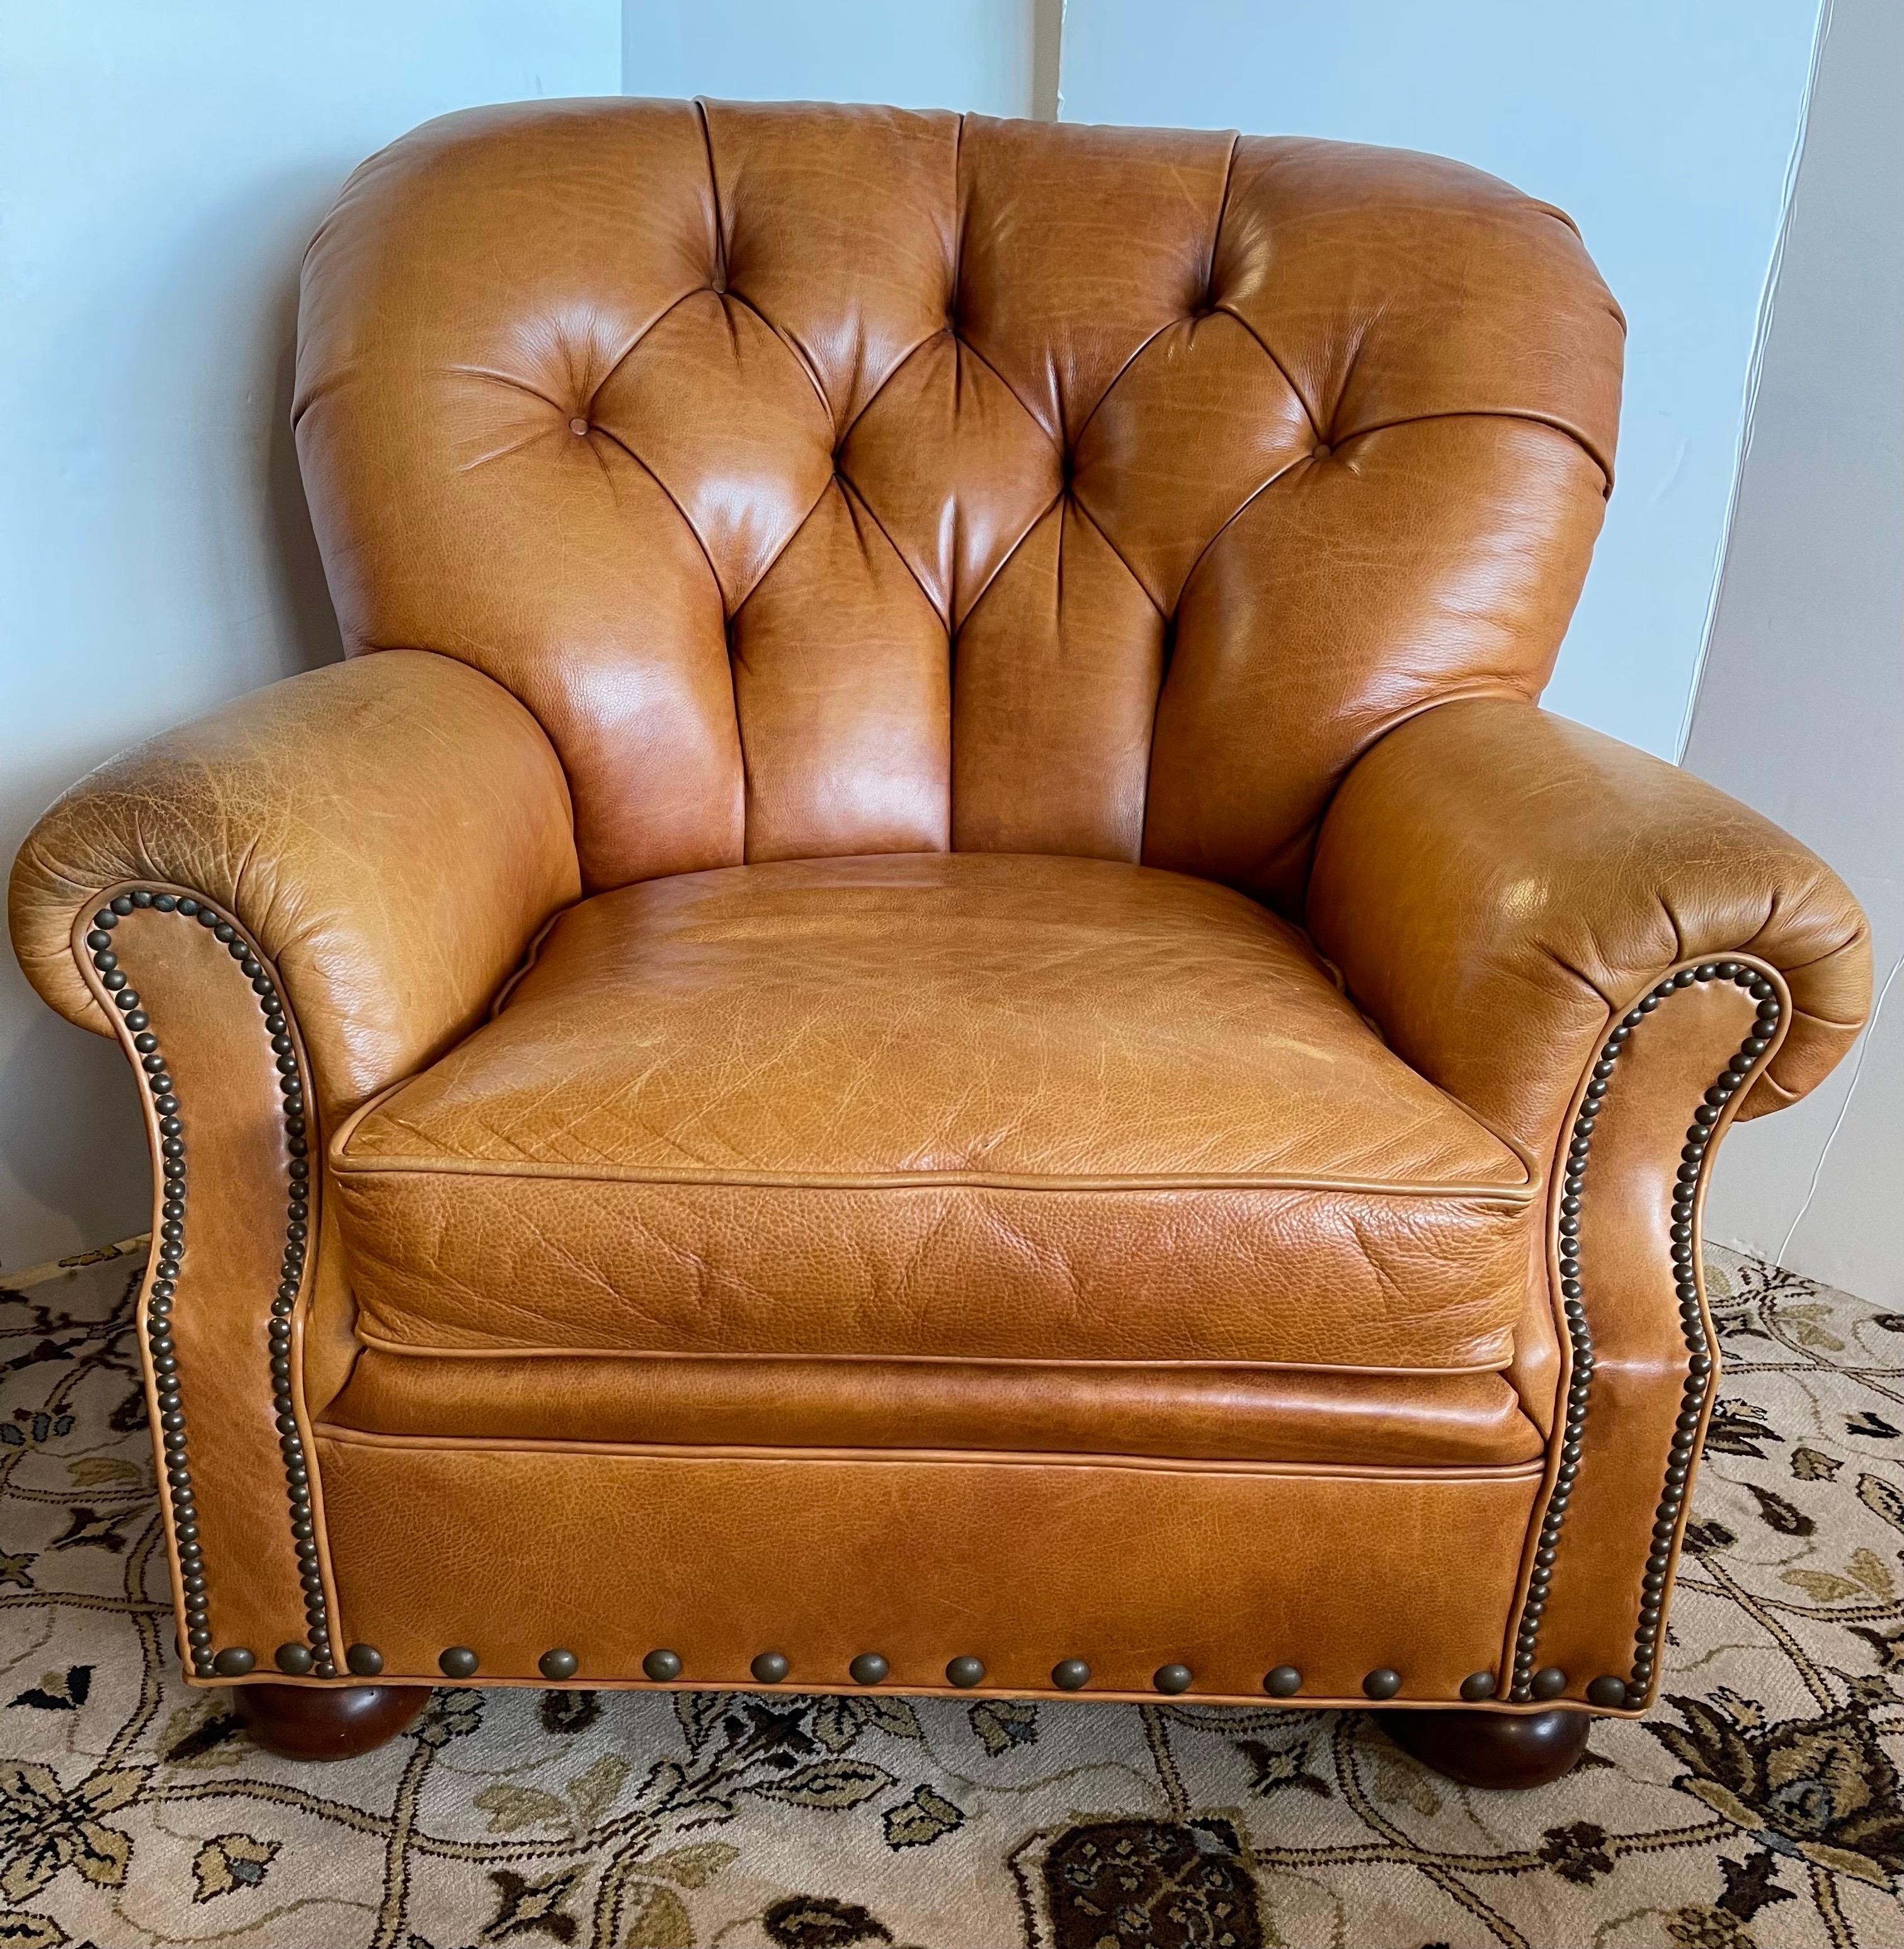 vintage leather chair and ottoman